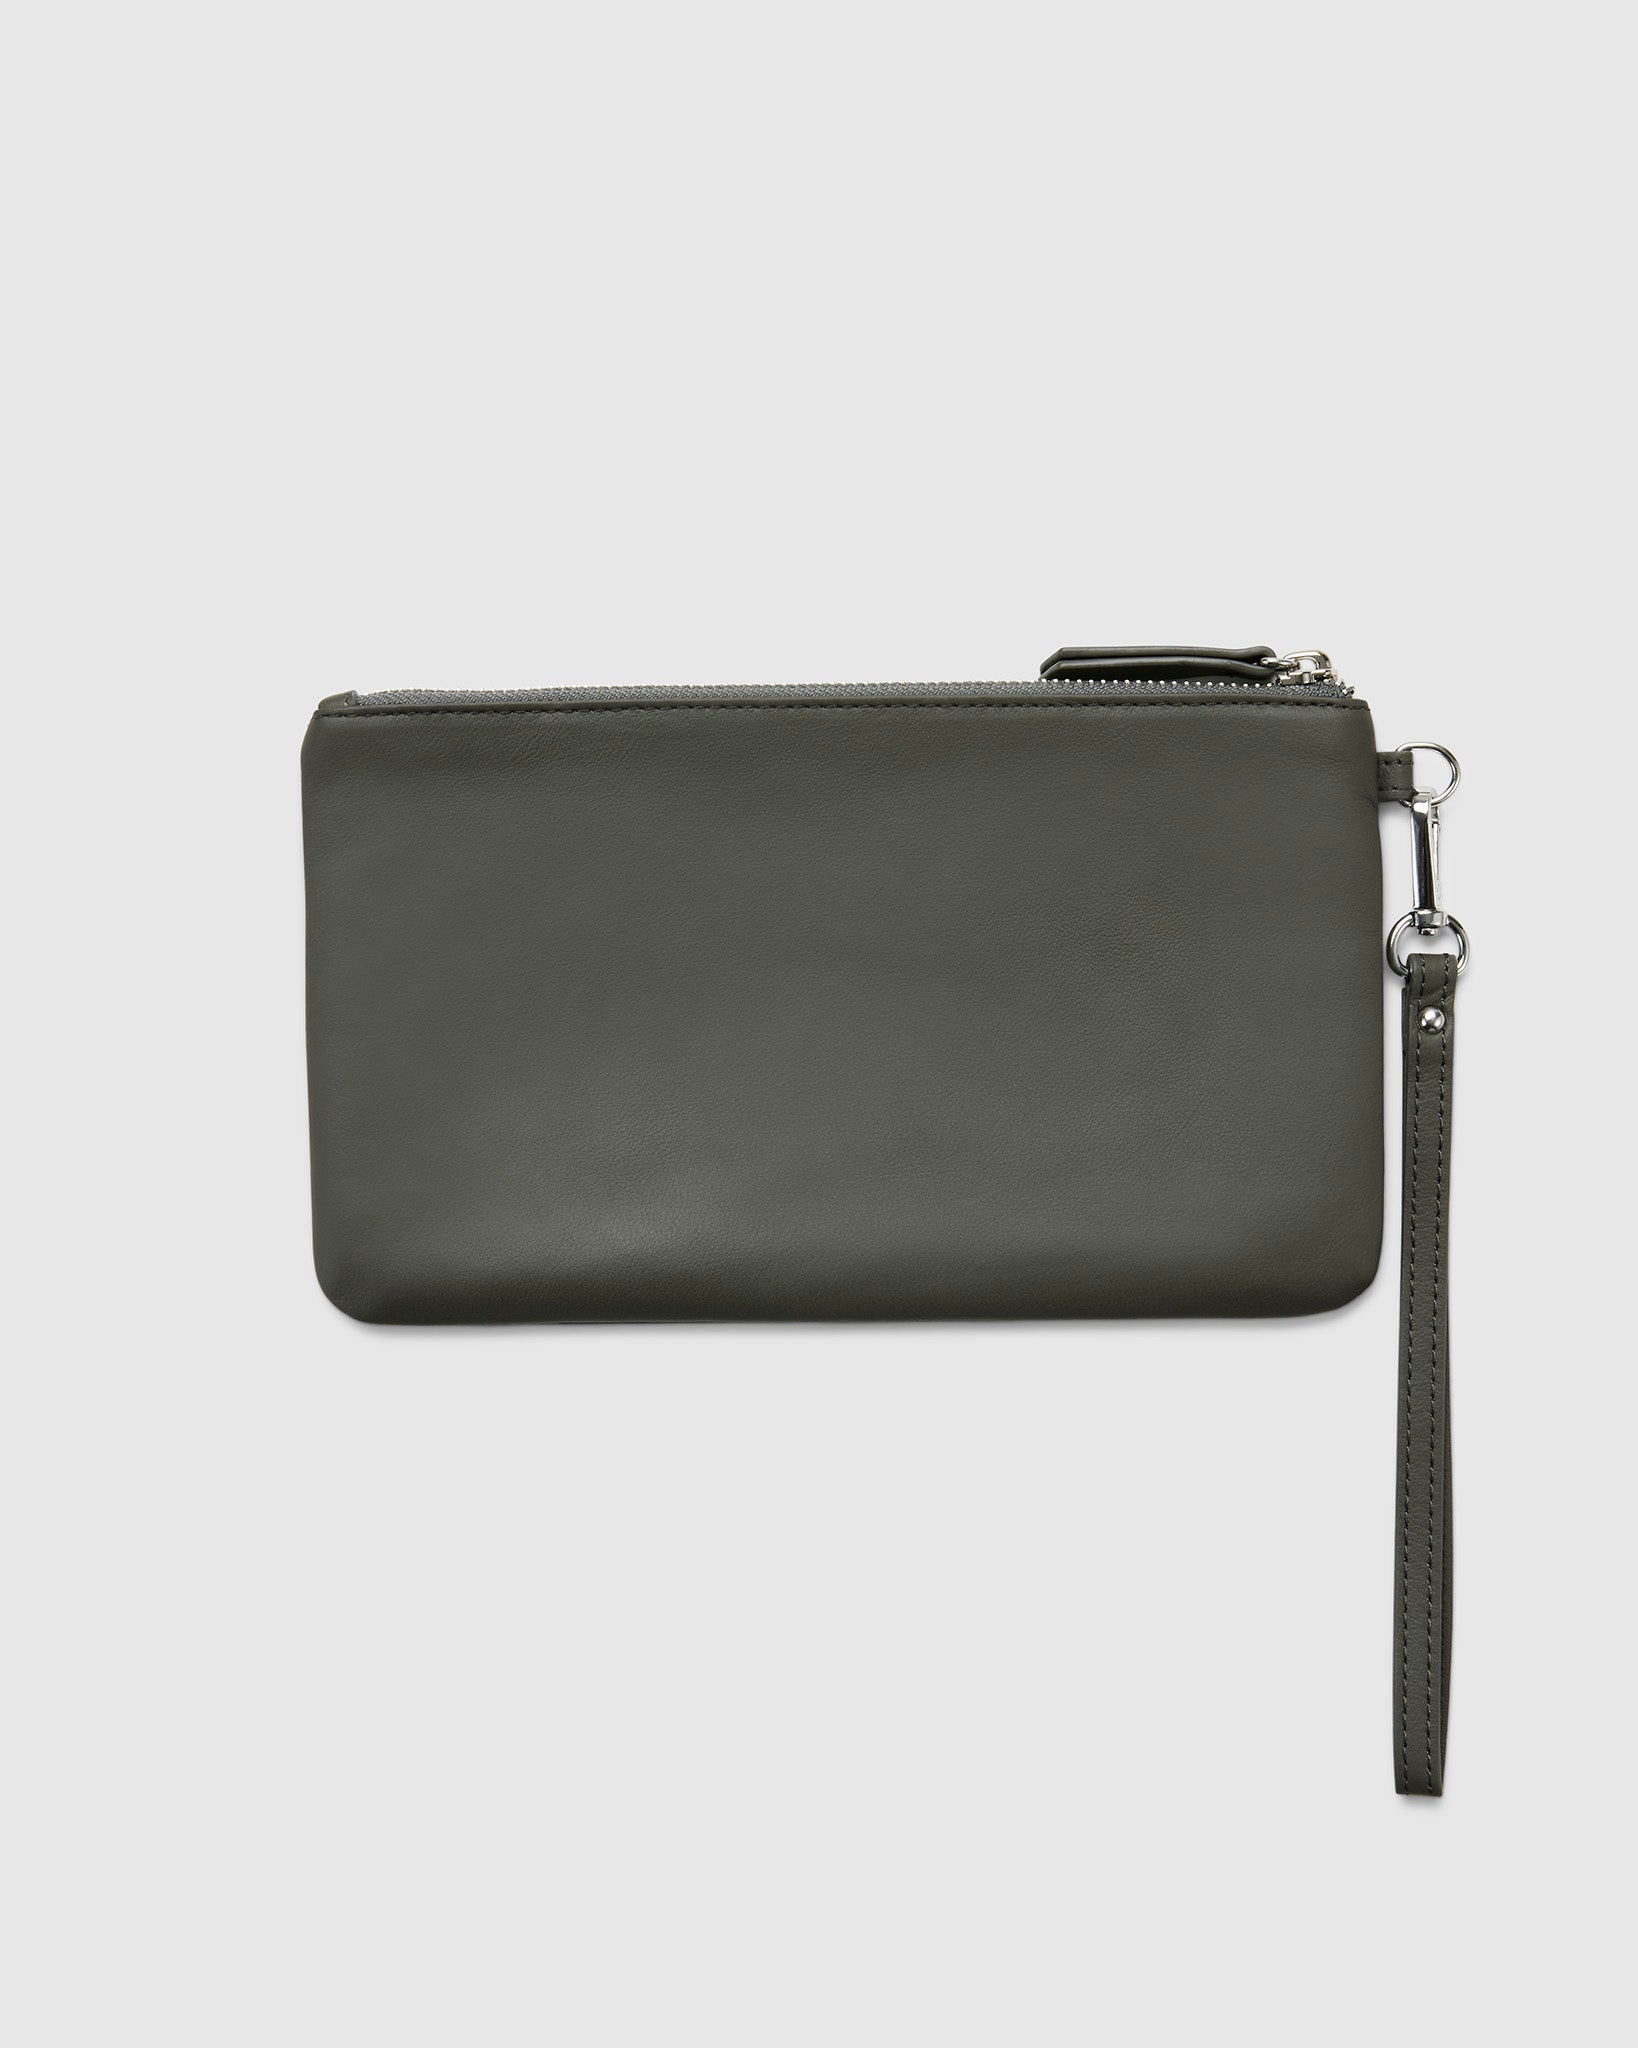 Leather Clutch in Orage